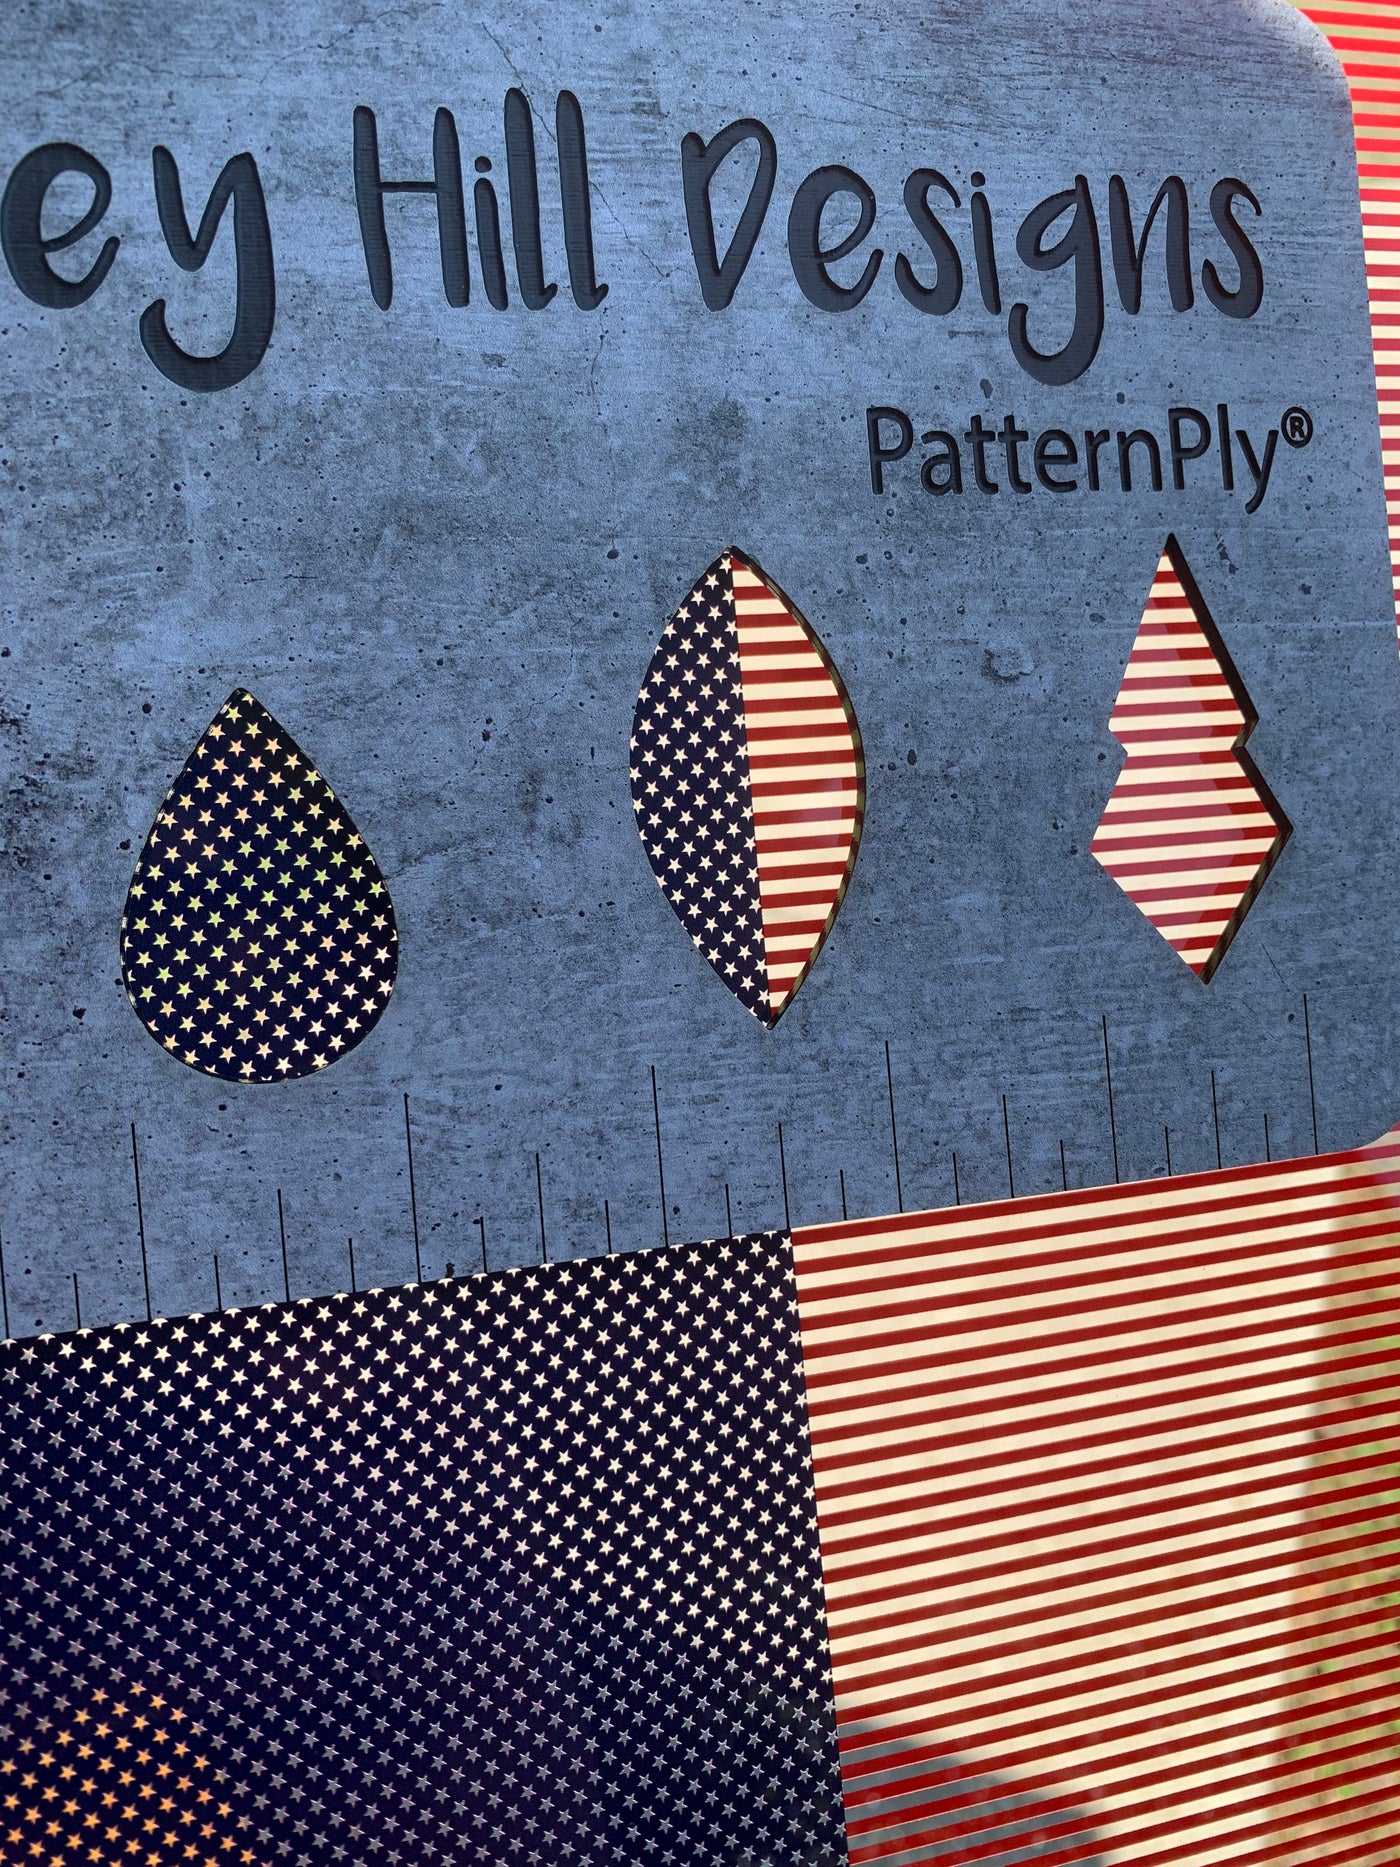 PatternPly® Scattered Micro US Flag